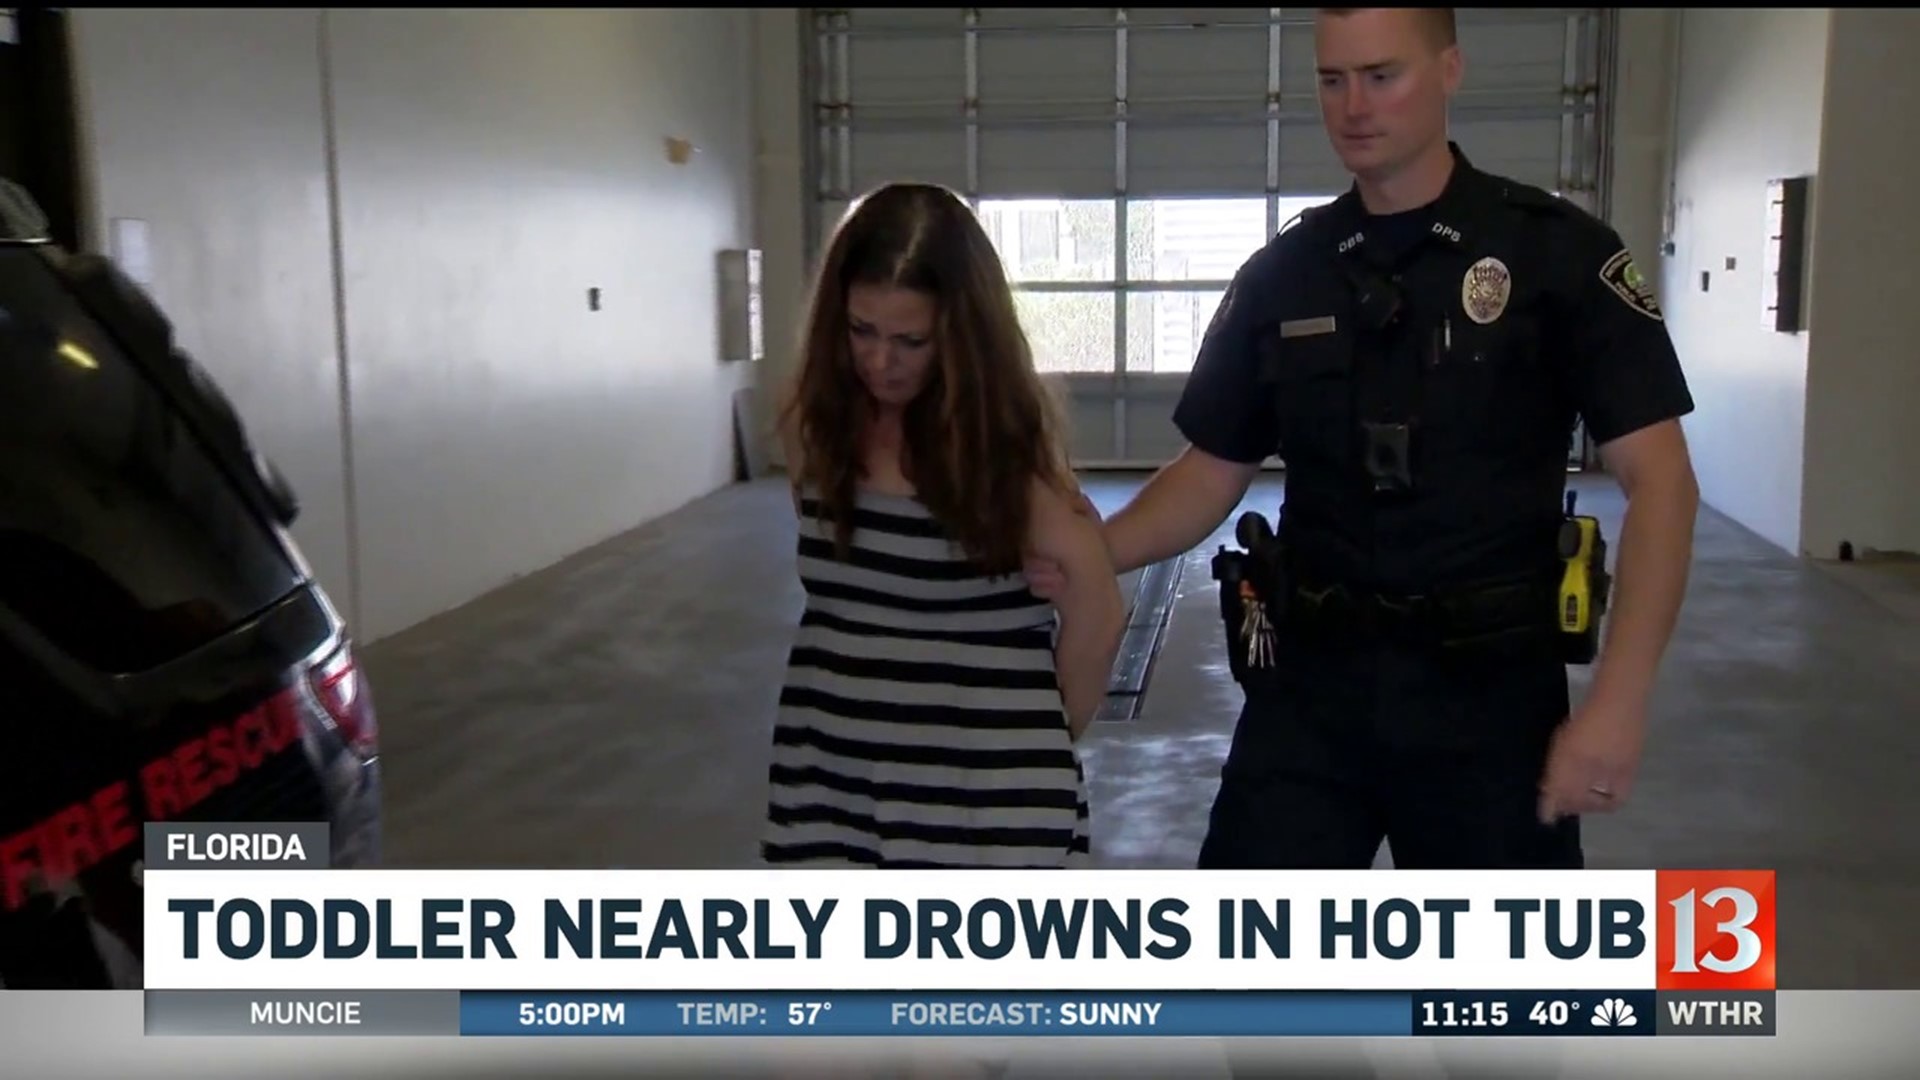 Mom Arrested For Neglect After 3 Year Old Nearly Drowns In Hotel Hot Tub